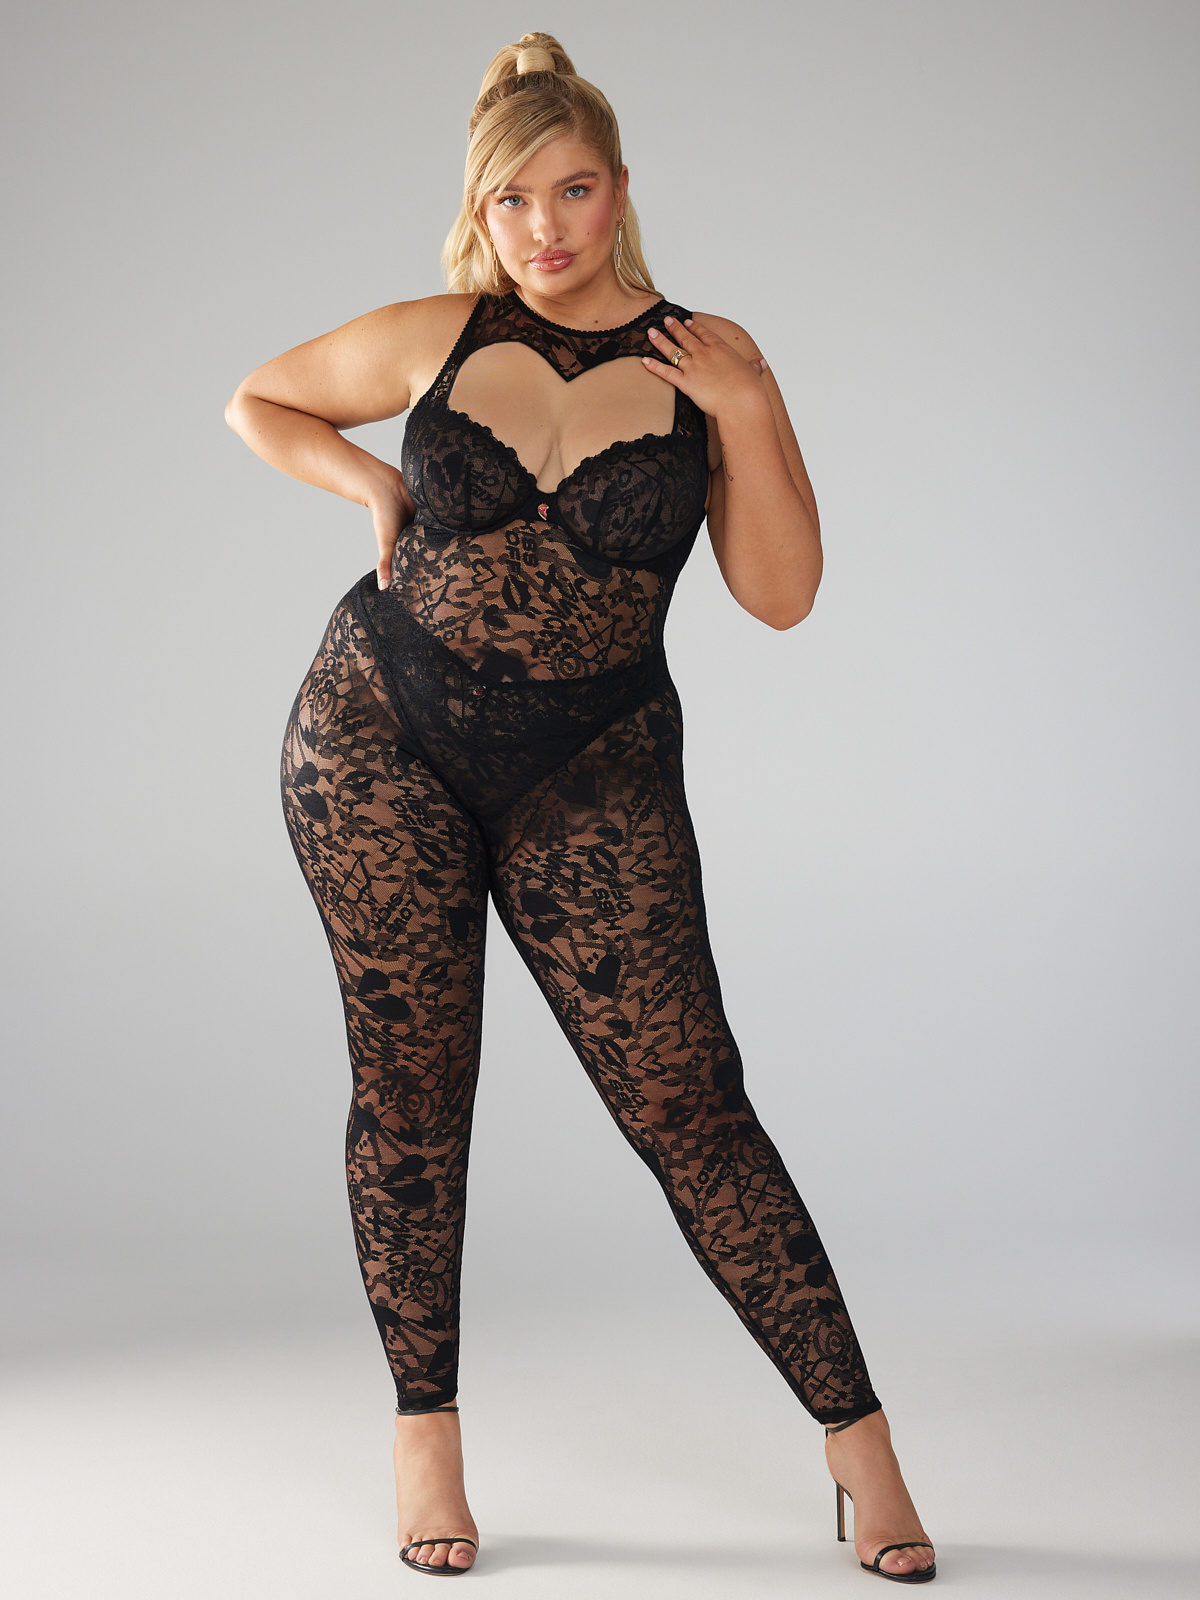 Lovestruck Lace Crotchless Catsuit in Black